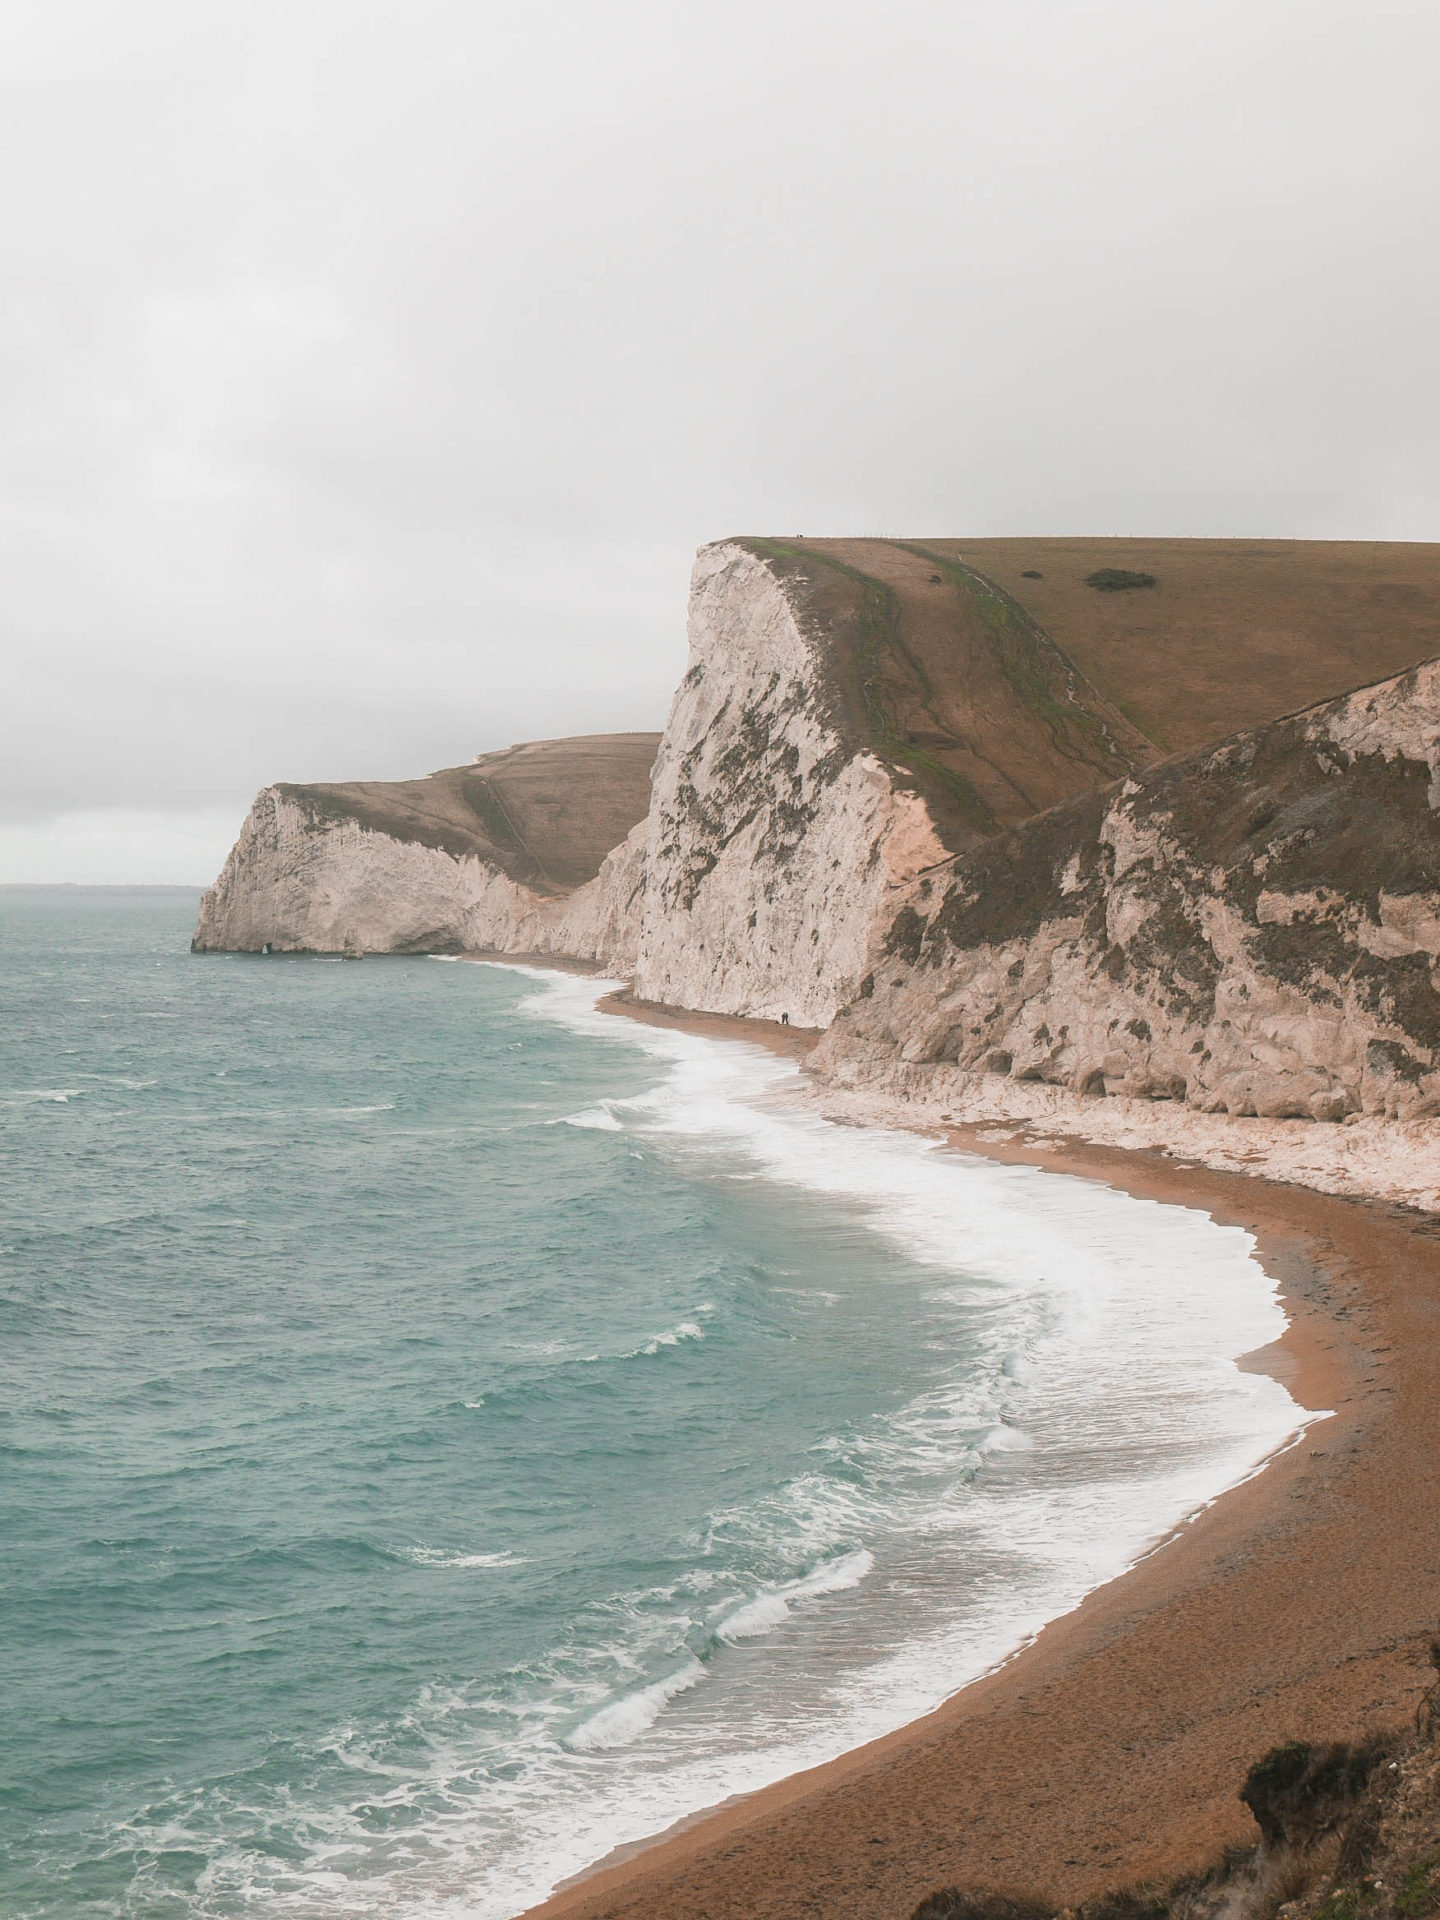 Hiking from Durdle Door to Lulworth Cove